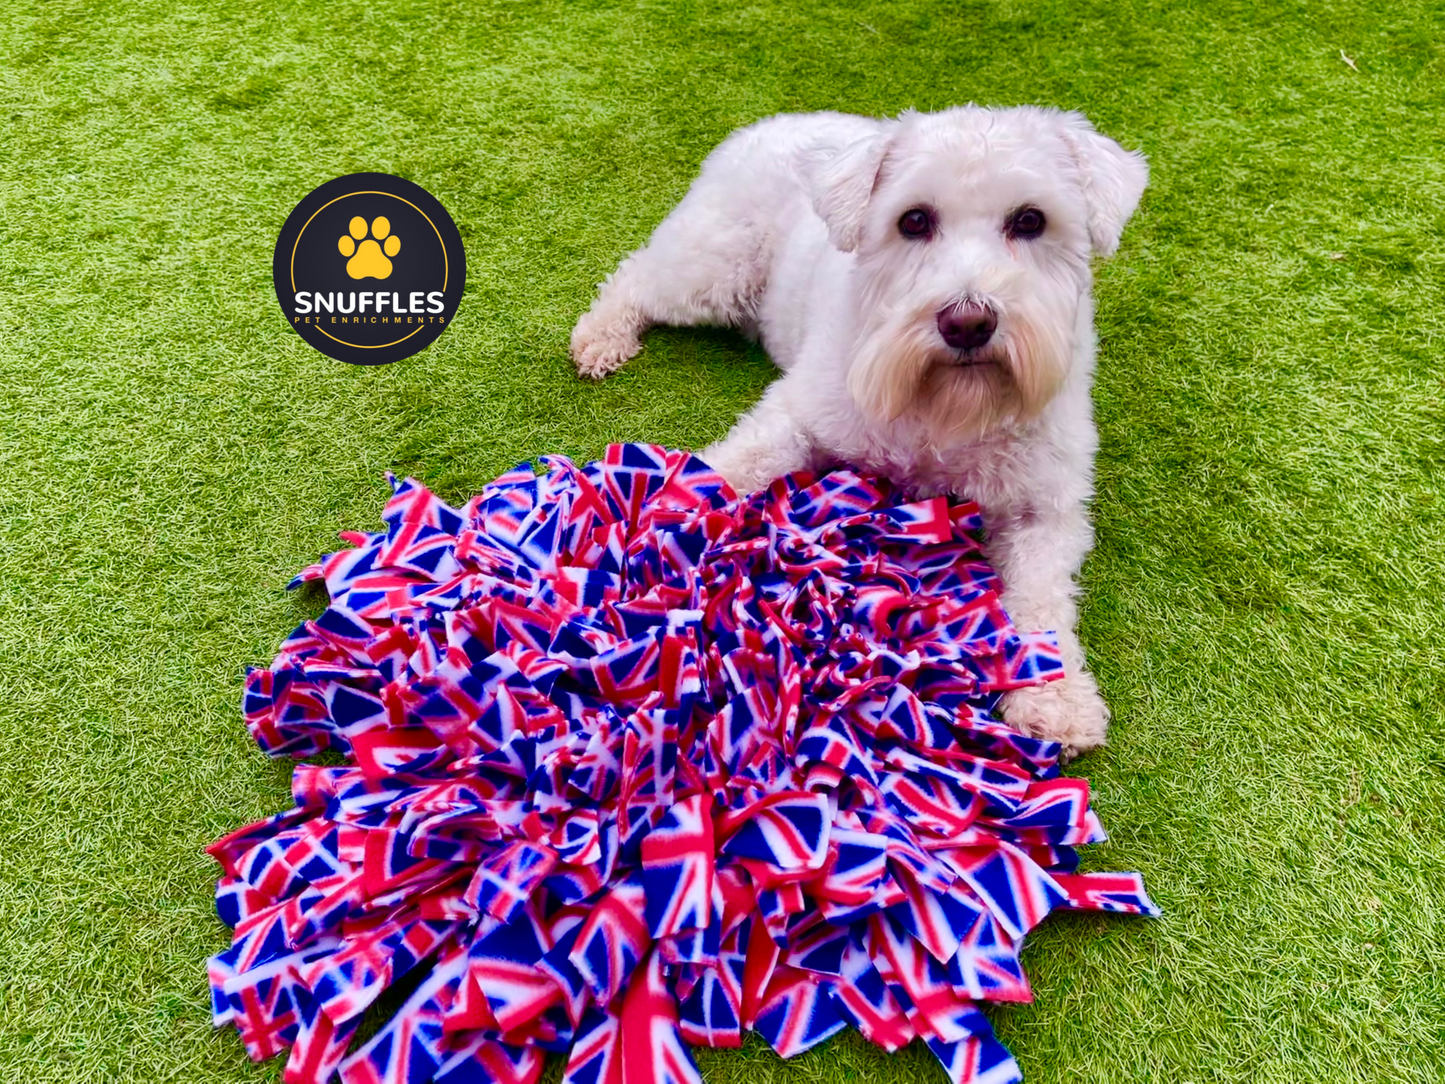 Medium Snuffle Mat For Dogs And Pets, 10 Colour Options Available